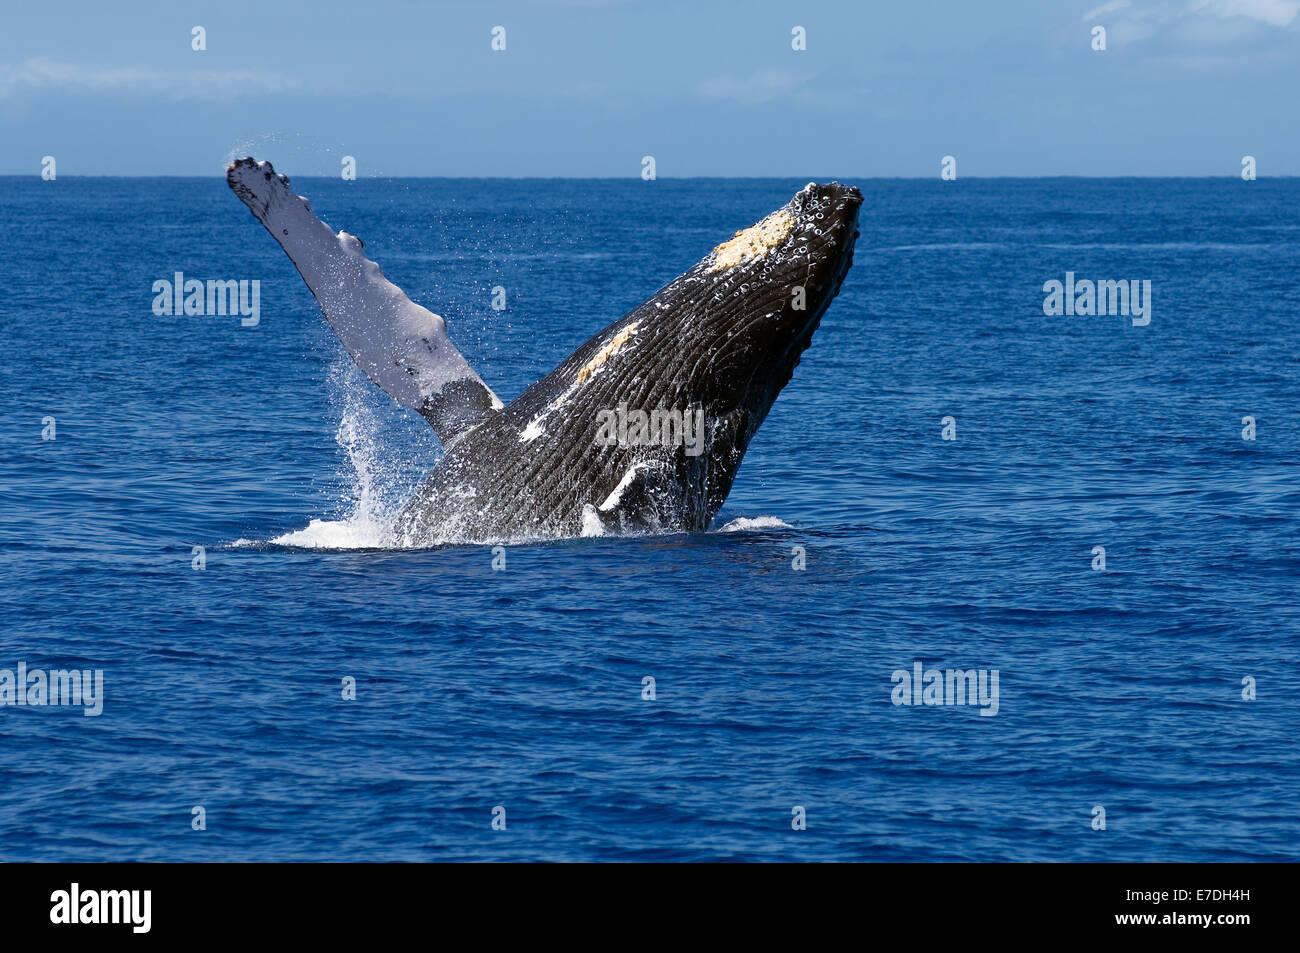 A humpback whale breaches off the coast of Maui, Hawaii.  The humpback whale migrates to the warm Hawaiian waters during the win Stock Photo